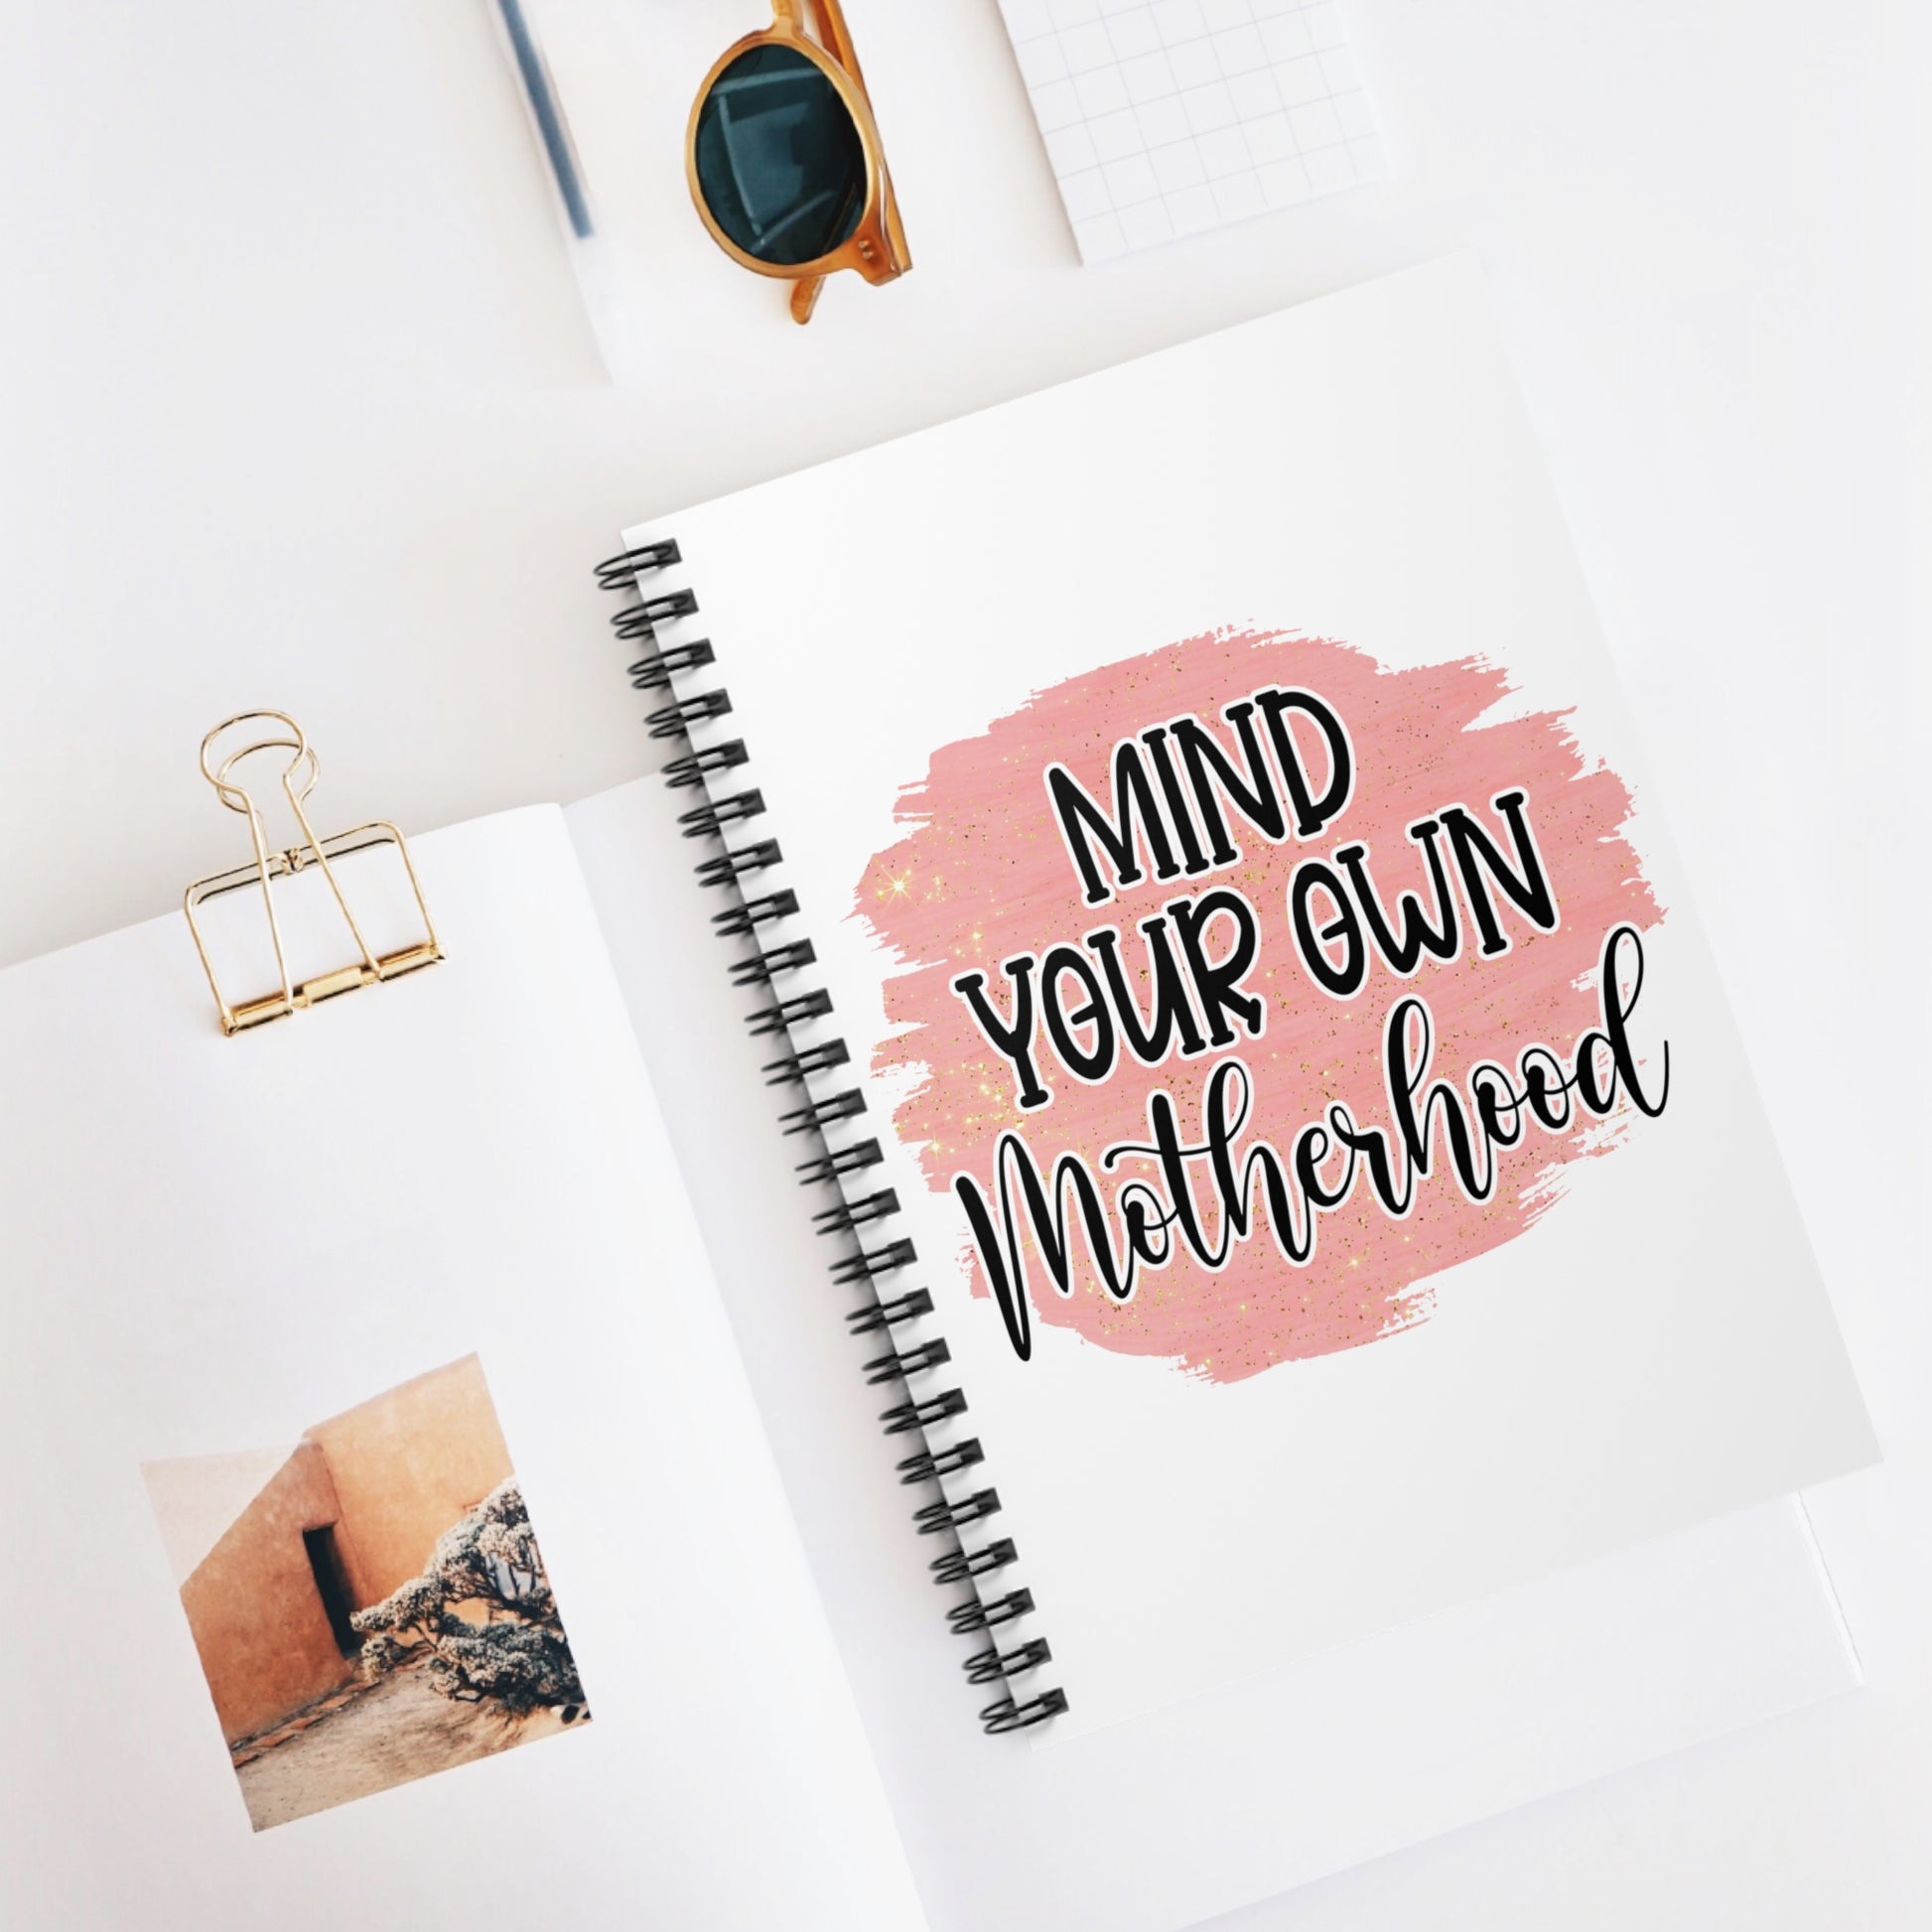 Mind Your Own Motherhood: Spiral Notebook - Log Books - Journals - Diaries - and More Custom Printed by TheGlassyLass